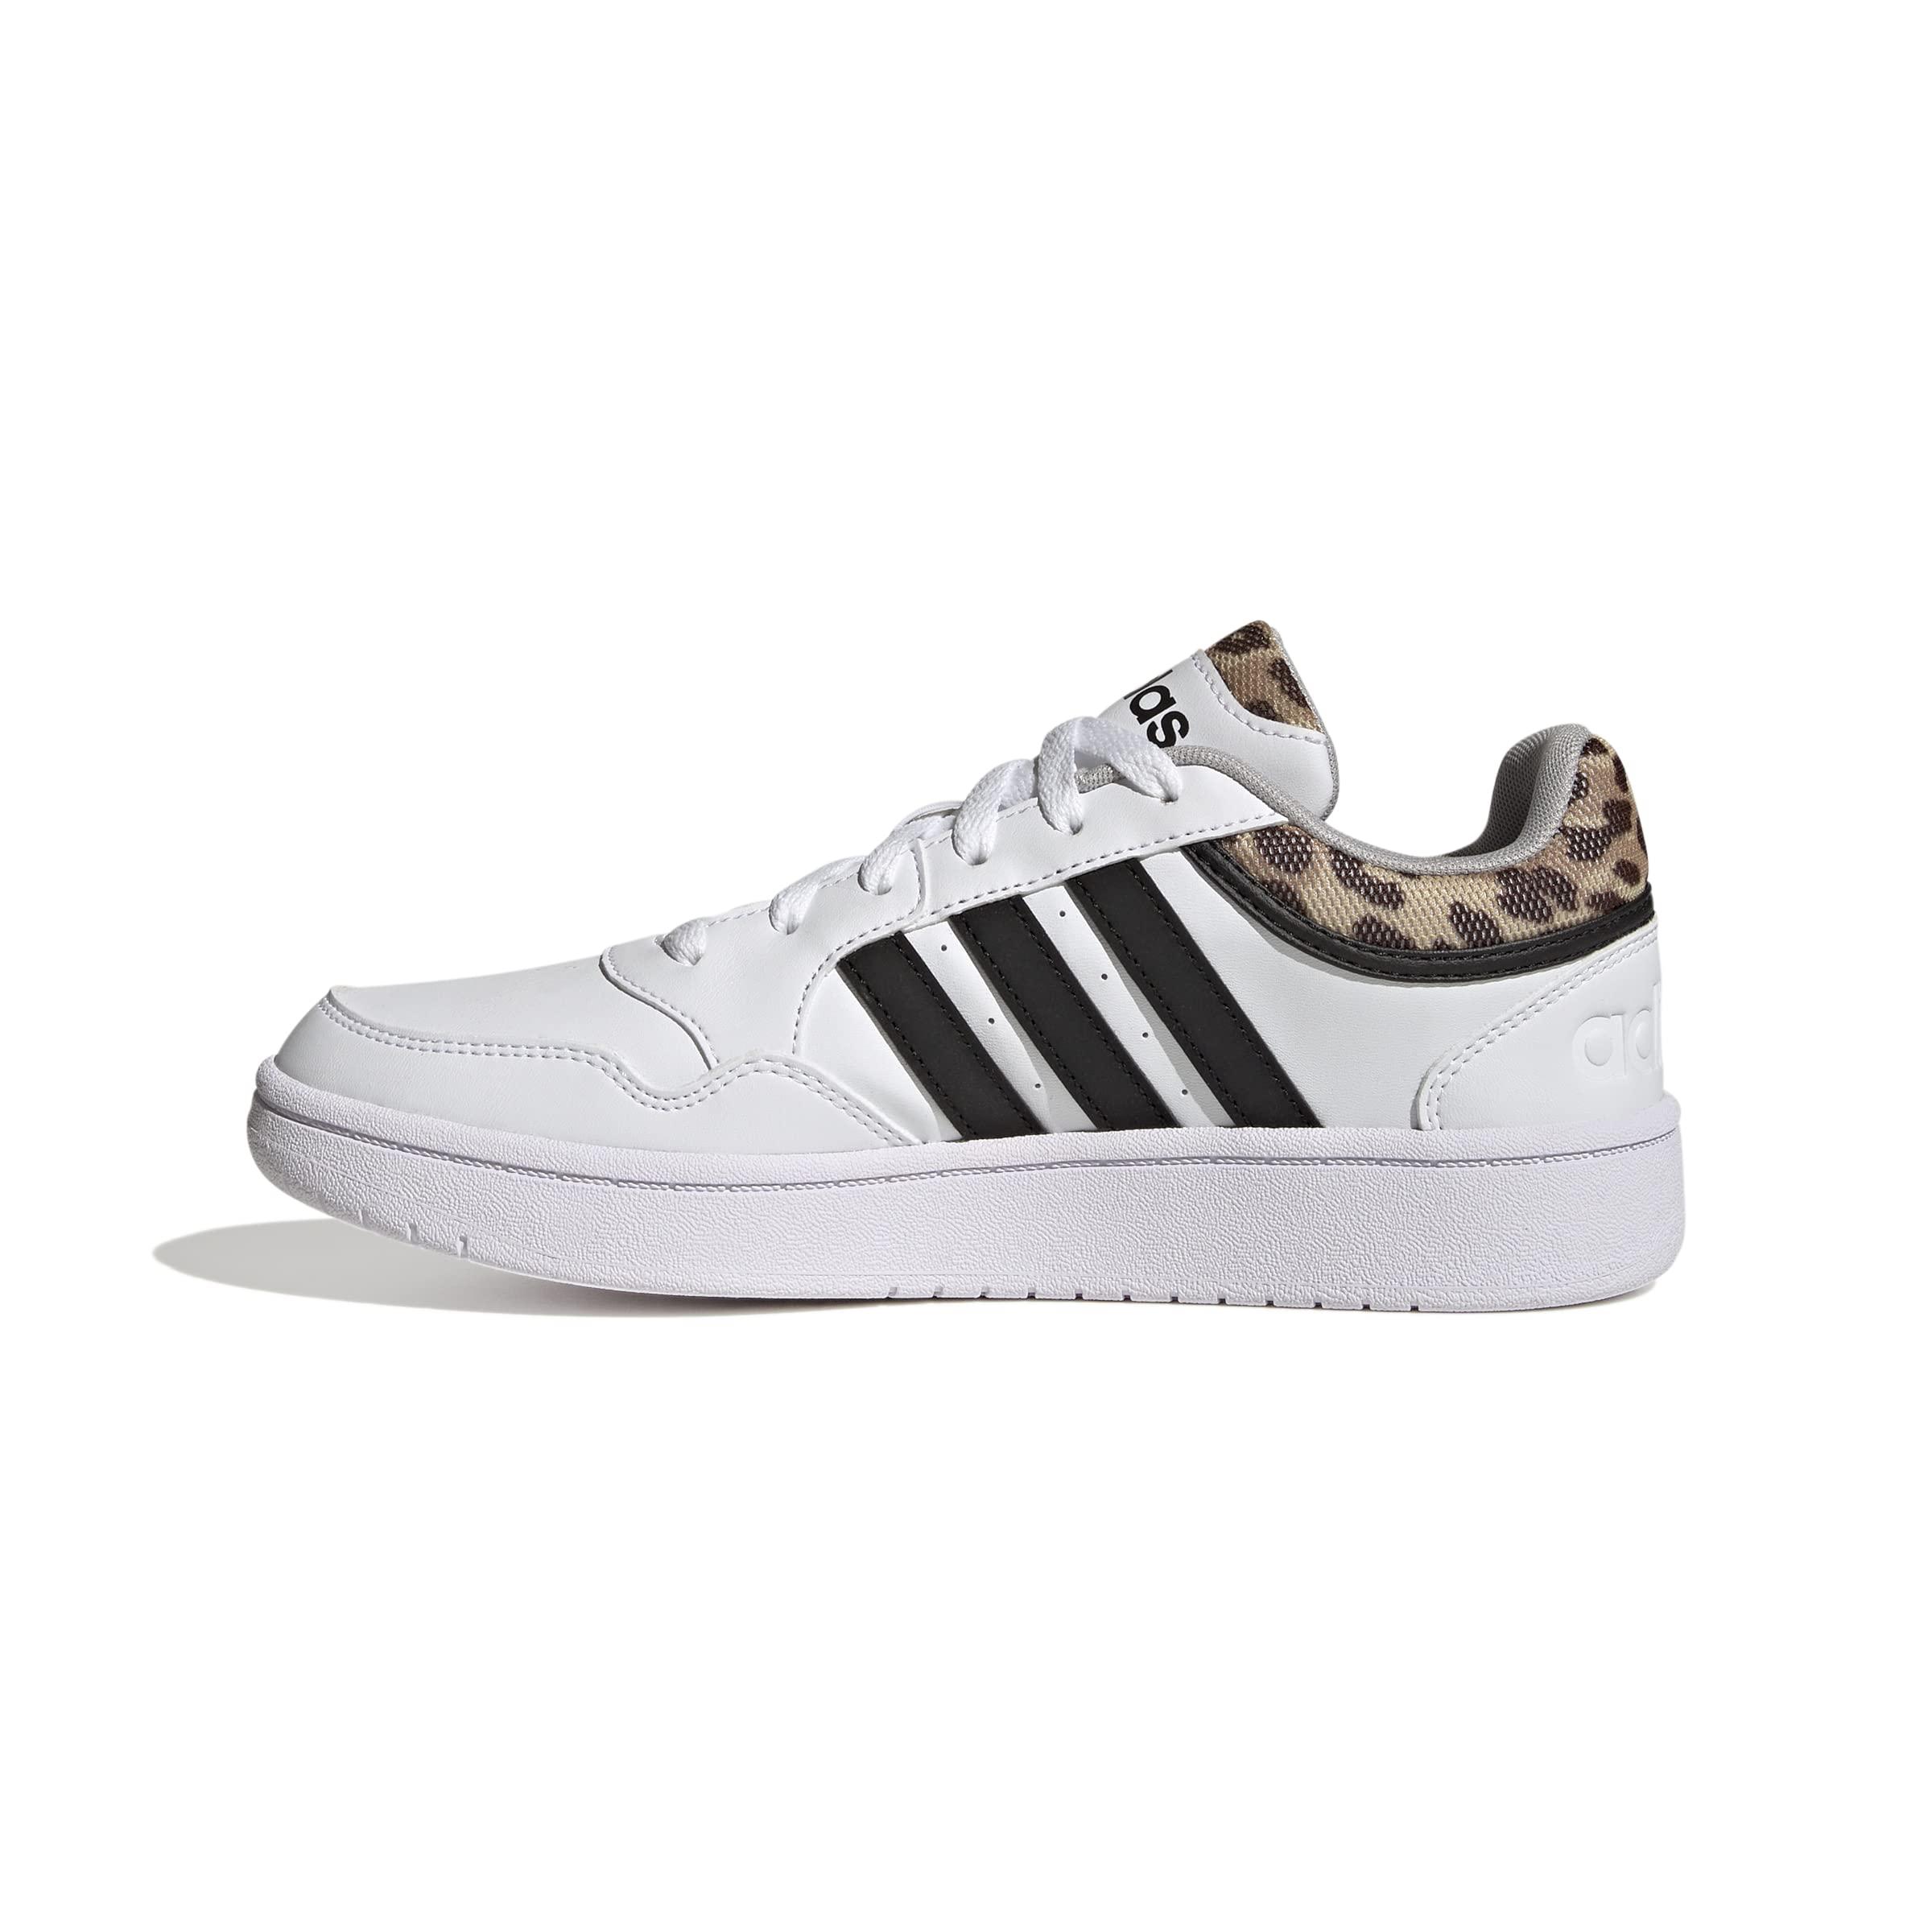 adidas Hoops 3.0 Basketball Shoe in White | Lyst